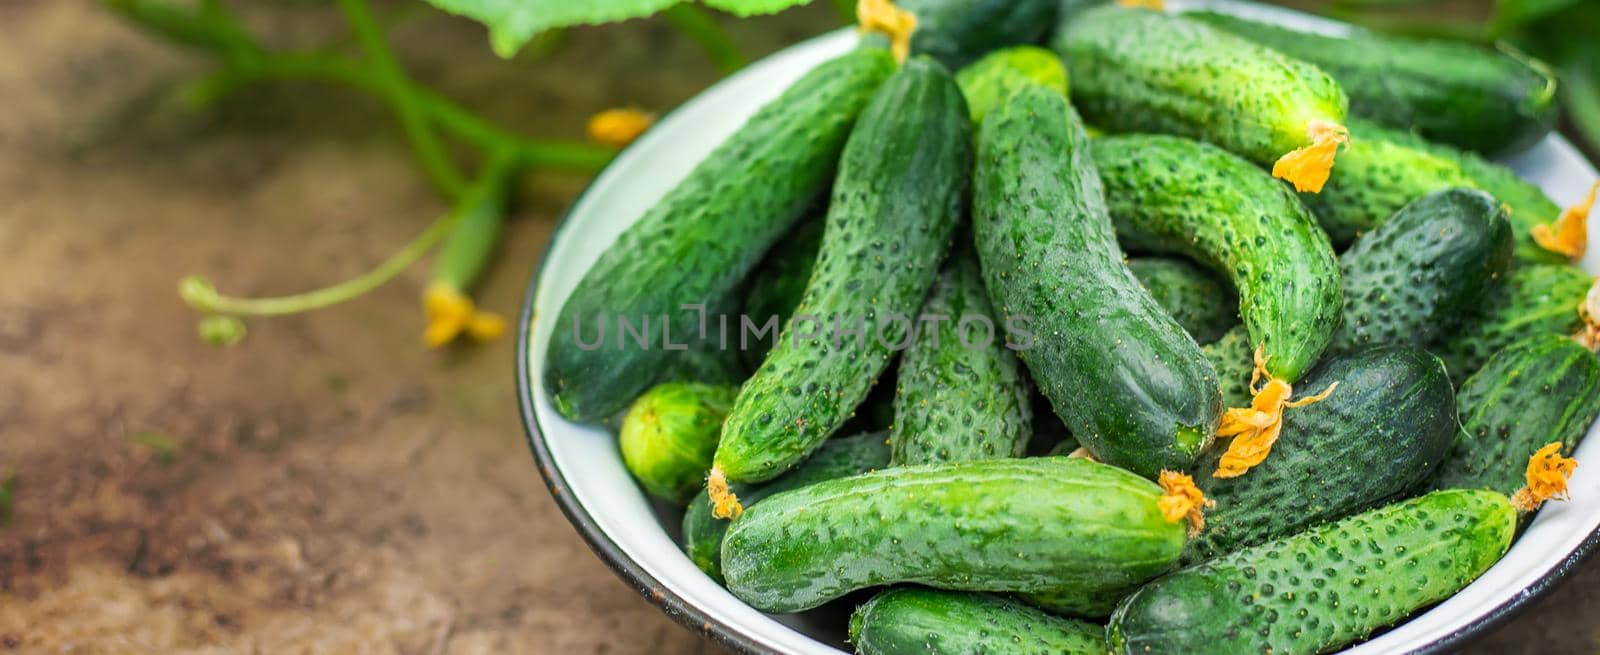 Harvesting homemade cucumbers. Selective focus. nature. food by mila1784